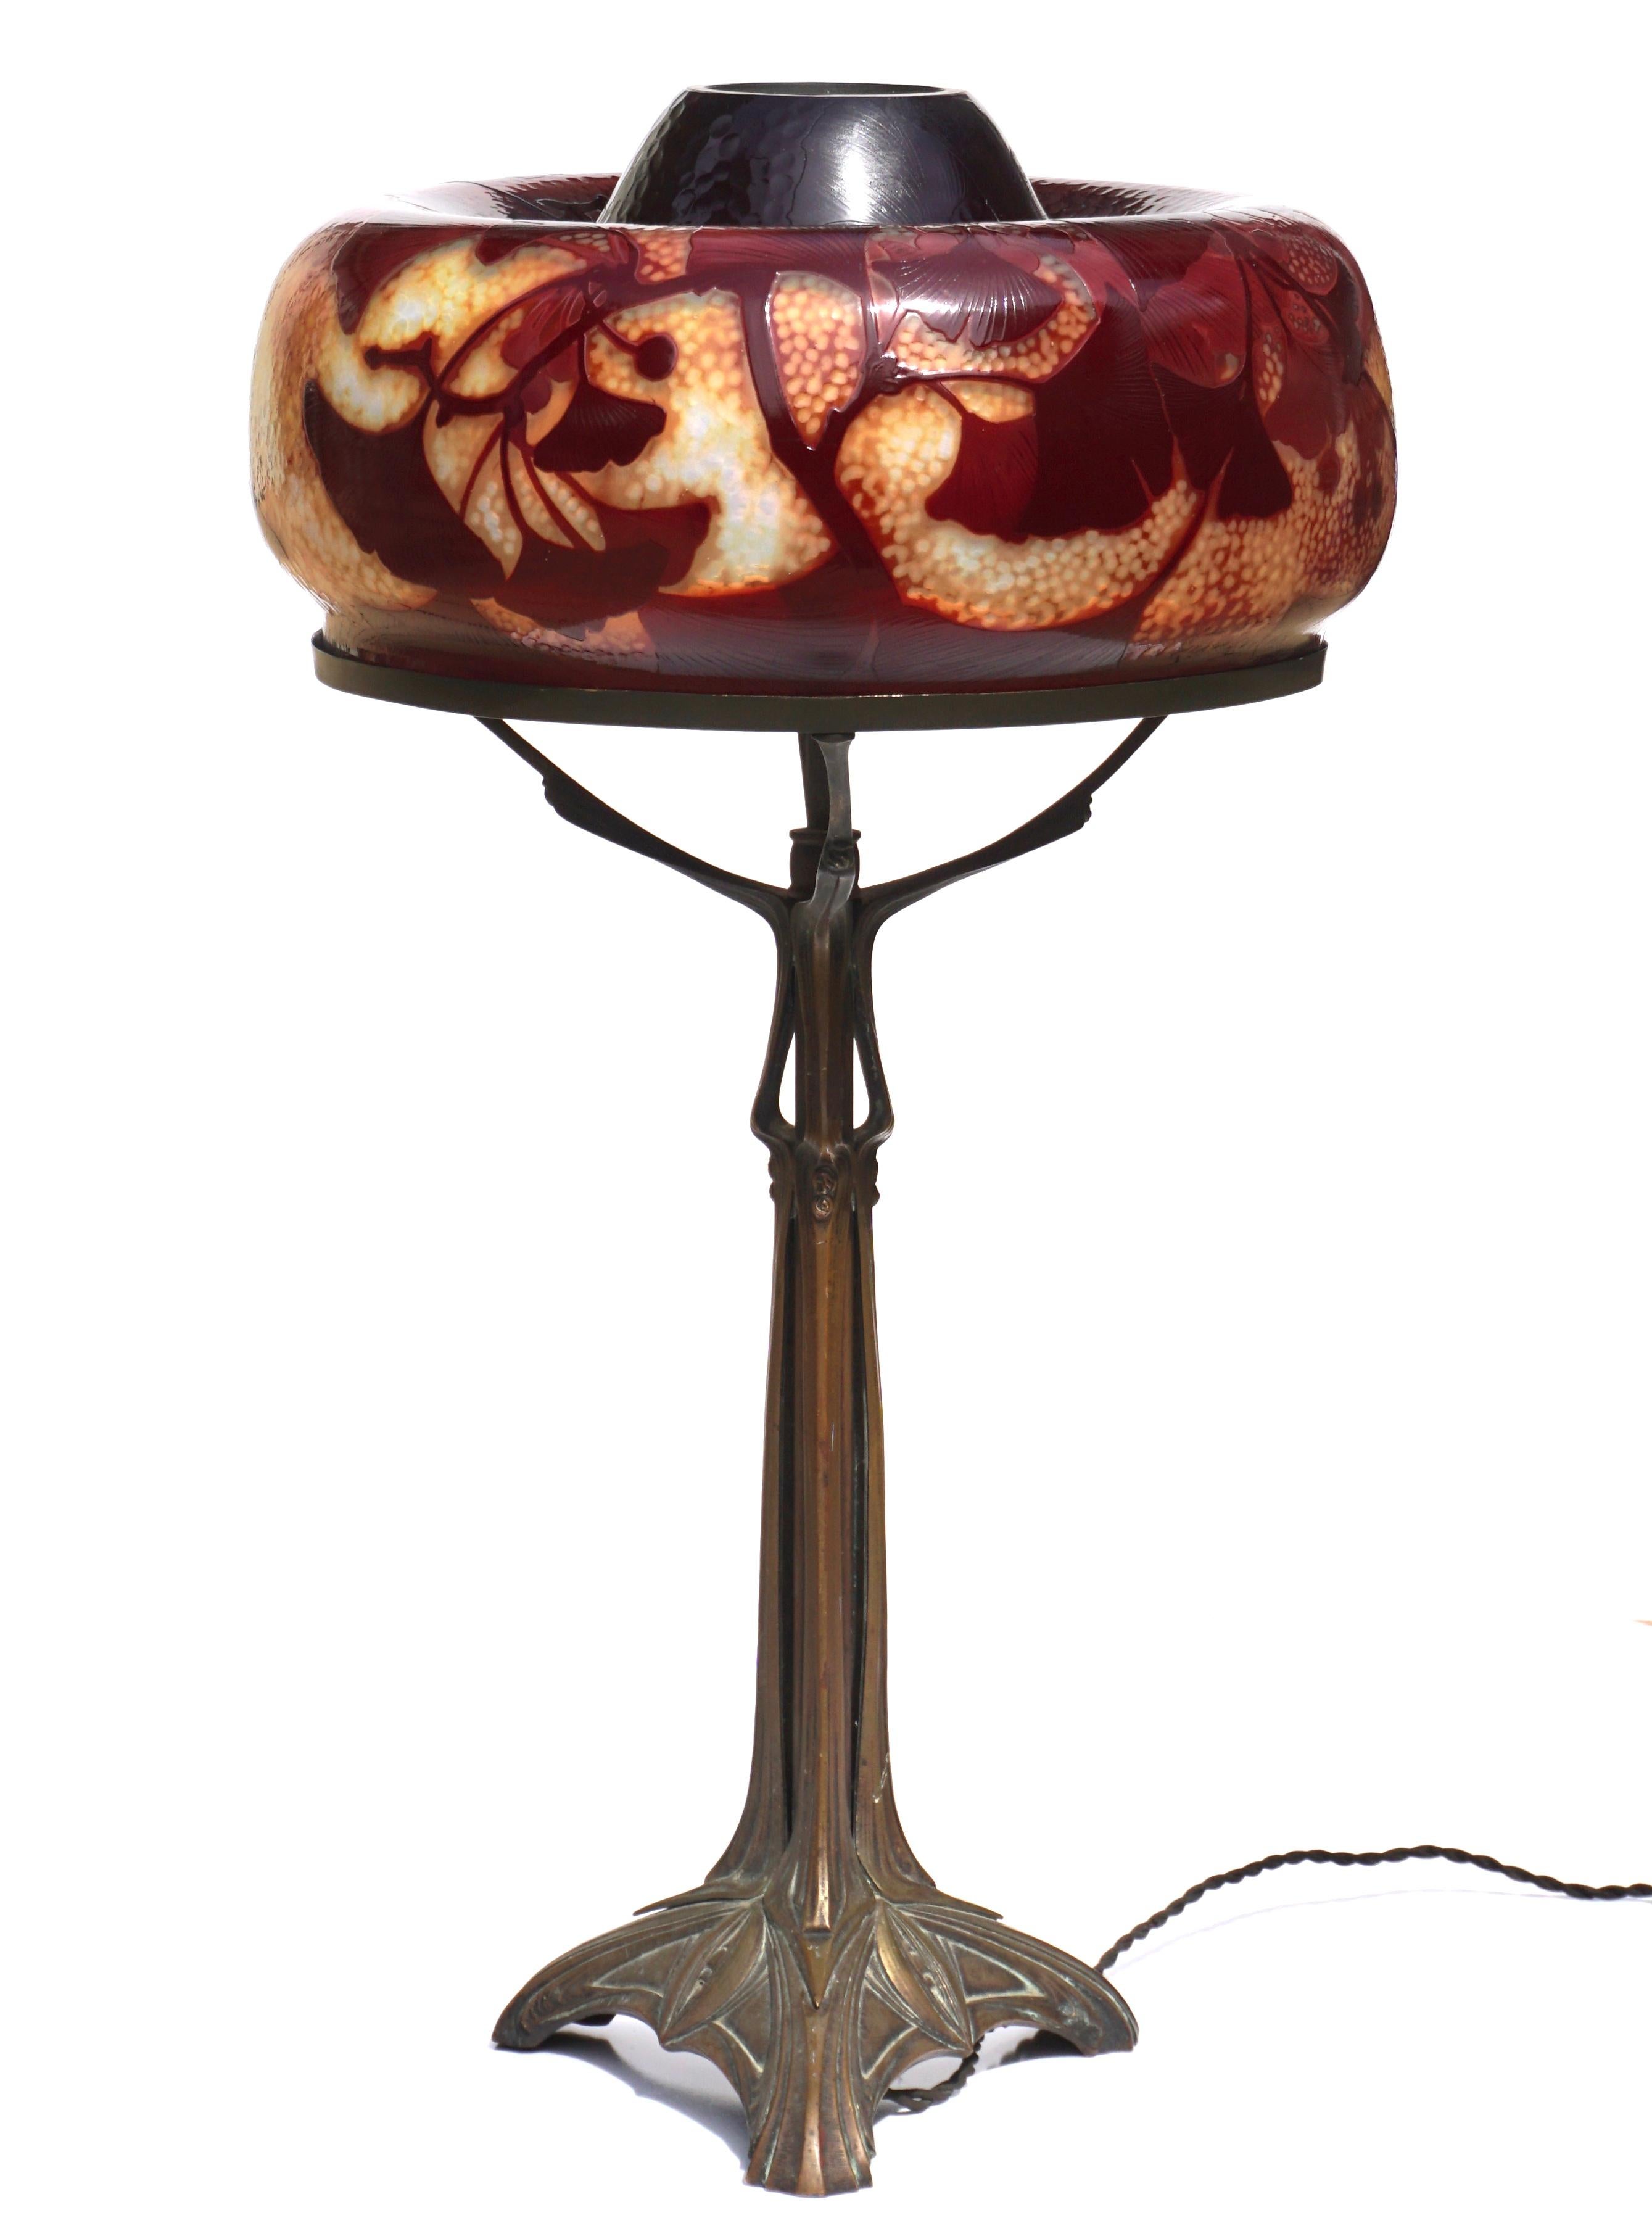 A large Daum Nancy French cameo glass lamp with martele designs of red and burgundy ginkgo biloba leaves on a hammered cream and yellow background, Circa 1900.

This marvelous and rare lamp is larger that life. The 12.5 diameter throws you off due